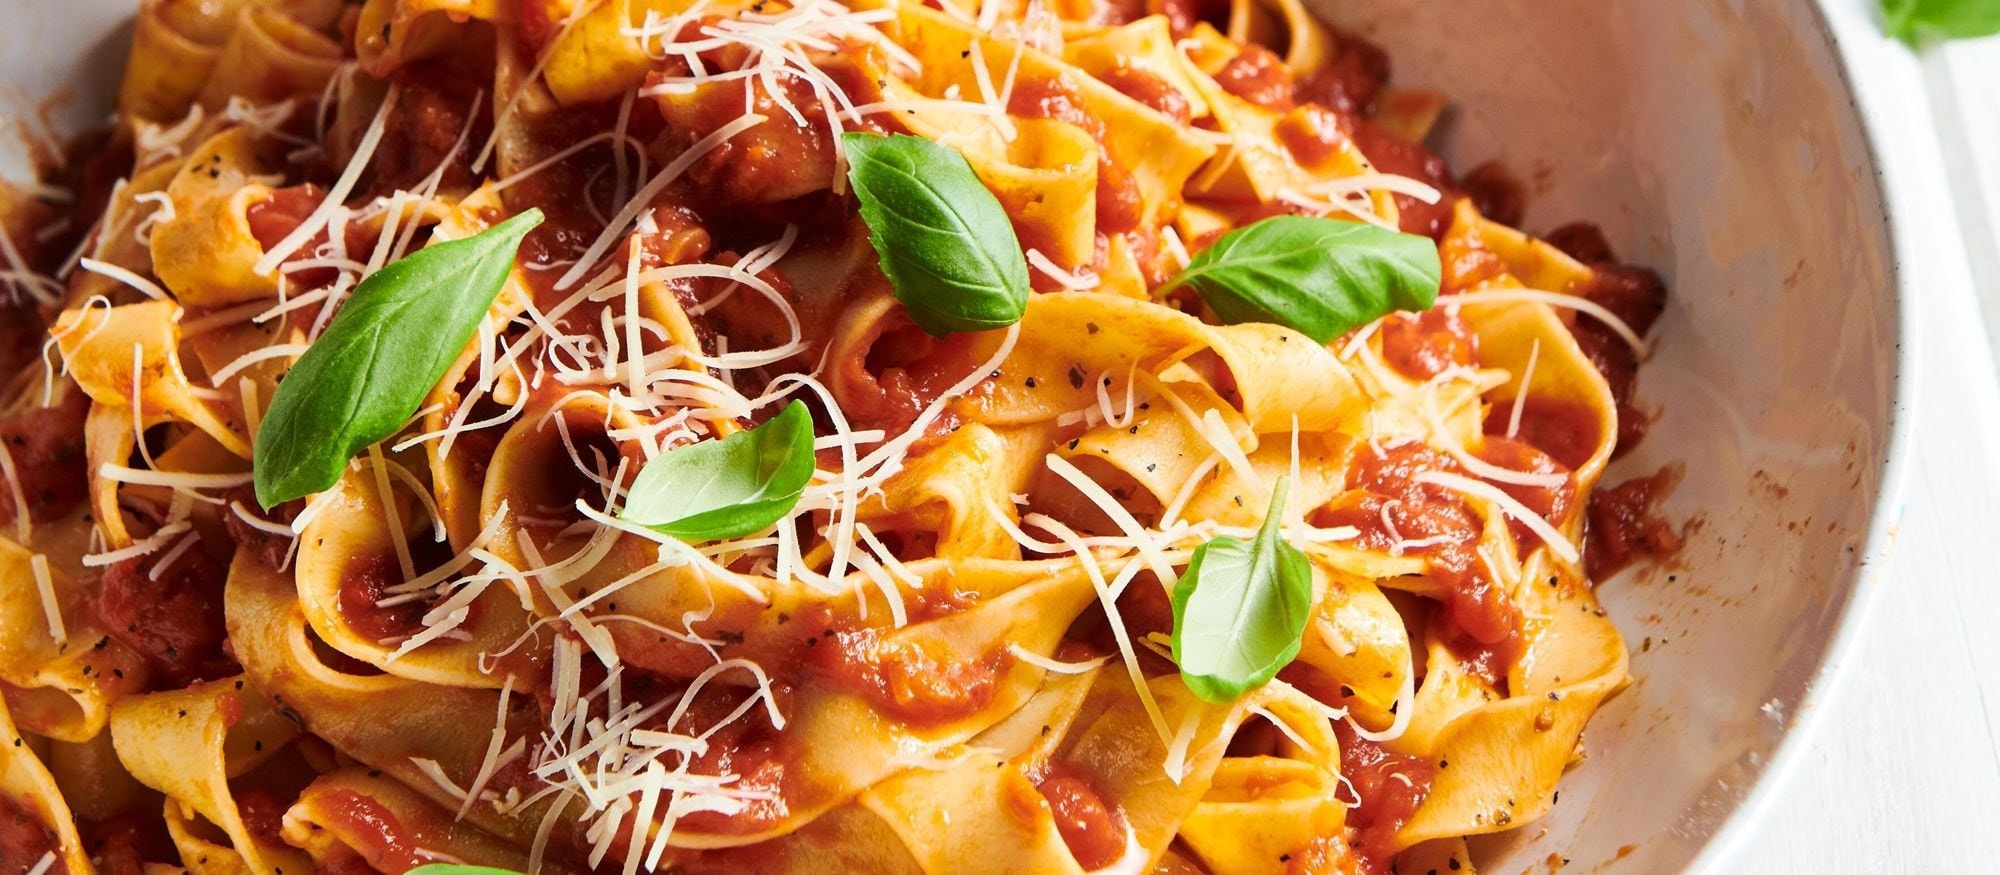 Easy and delicious Pappardelle Noodle recipe using your Wolf Range